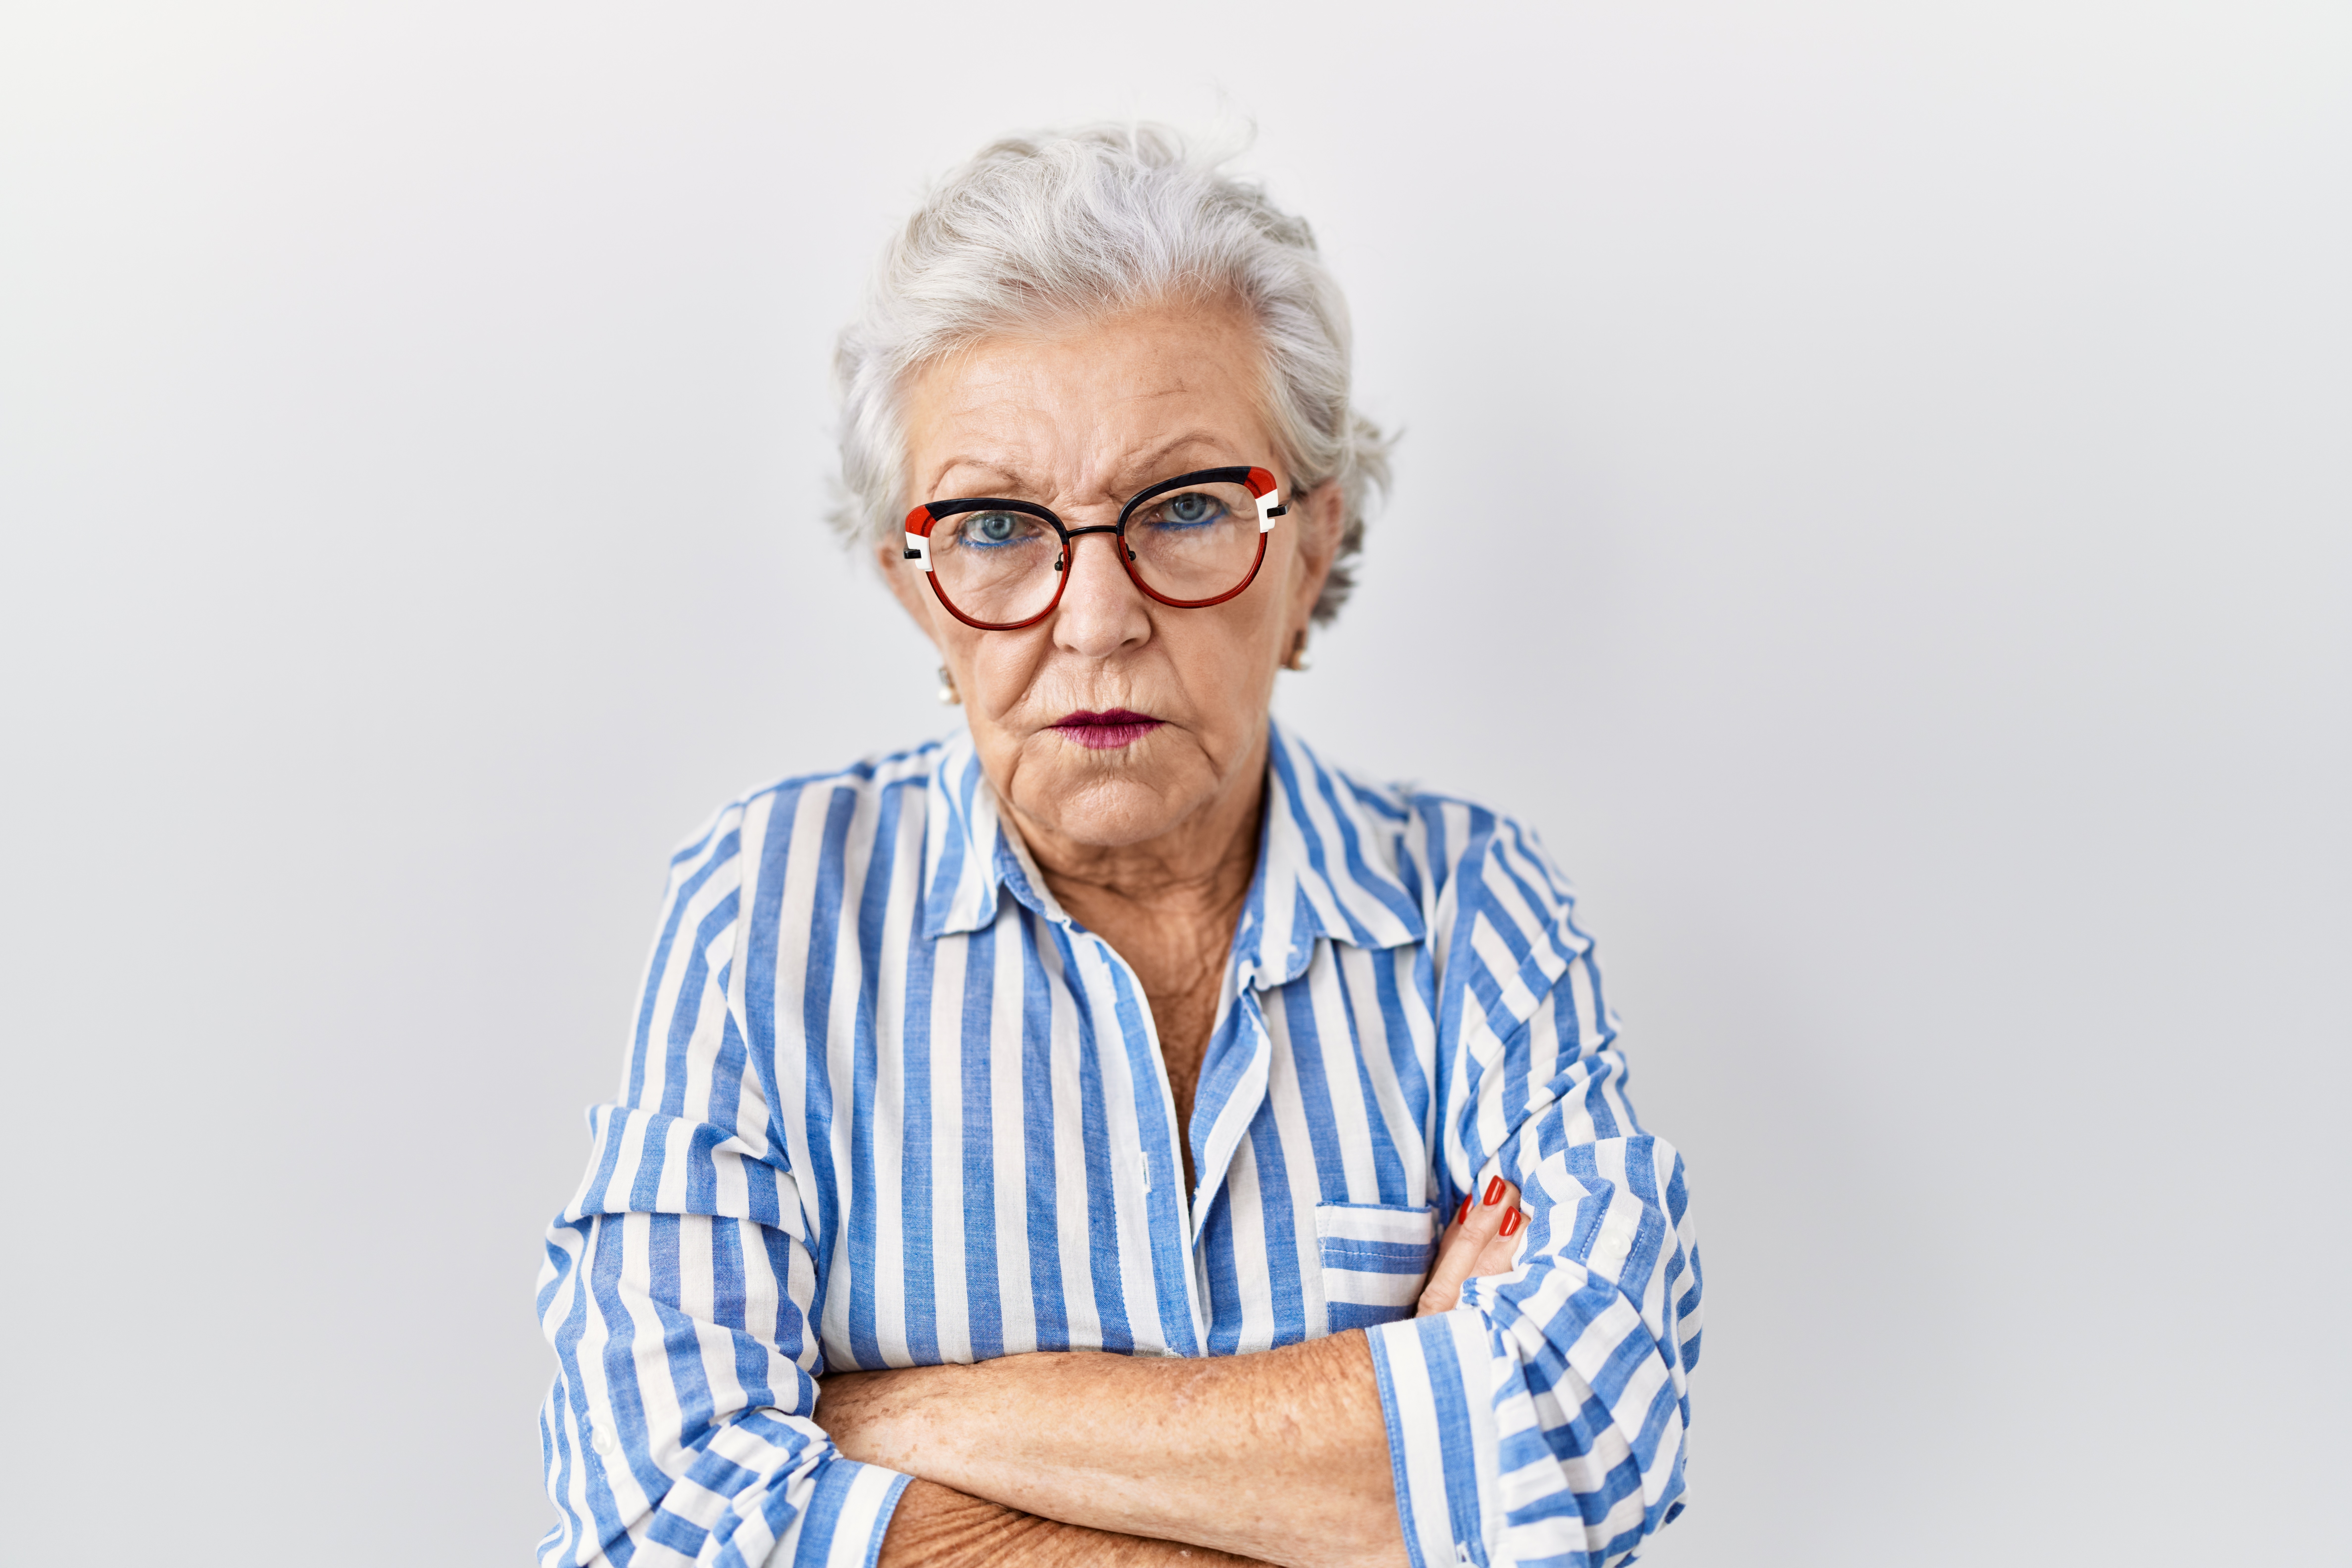 An angry senior woman | Source: Shutterstock